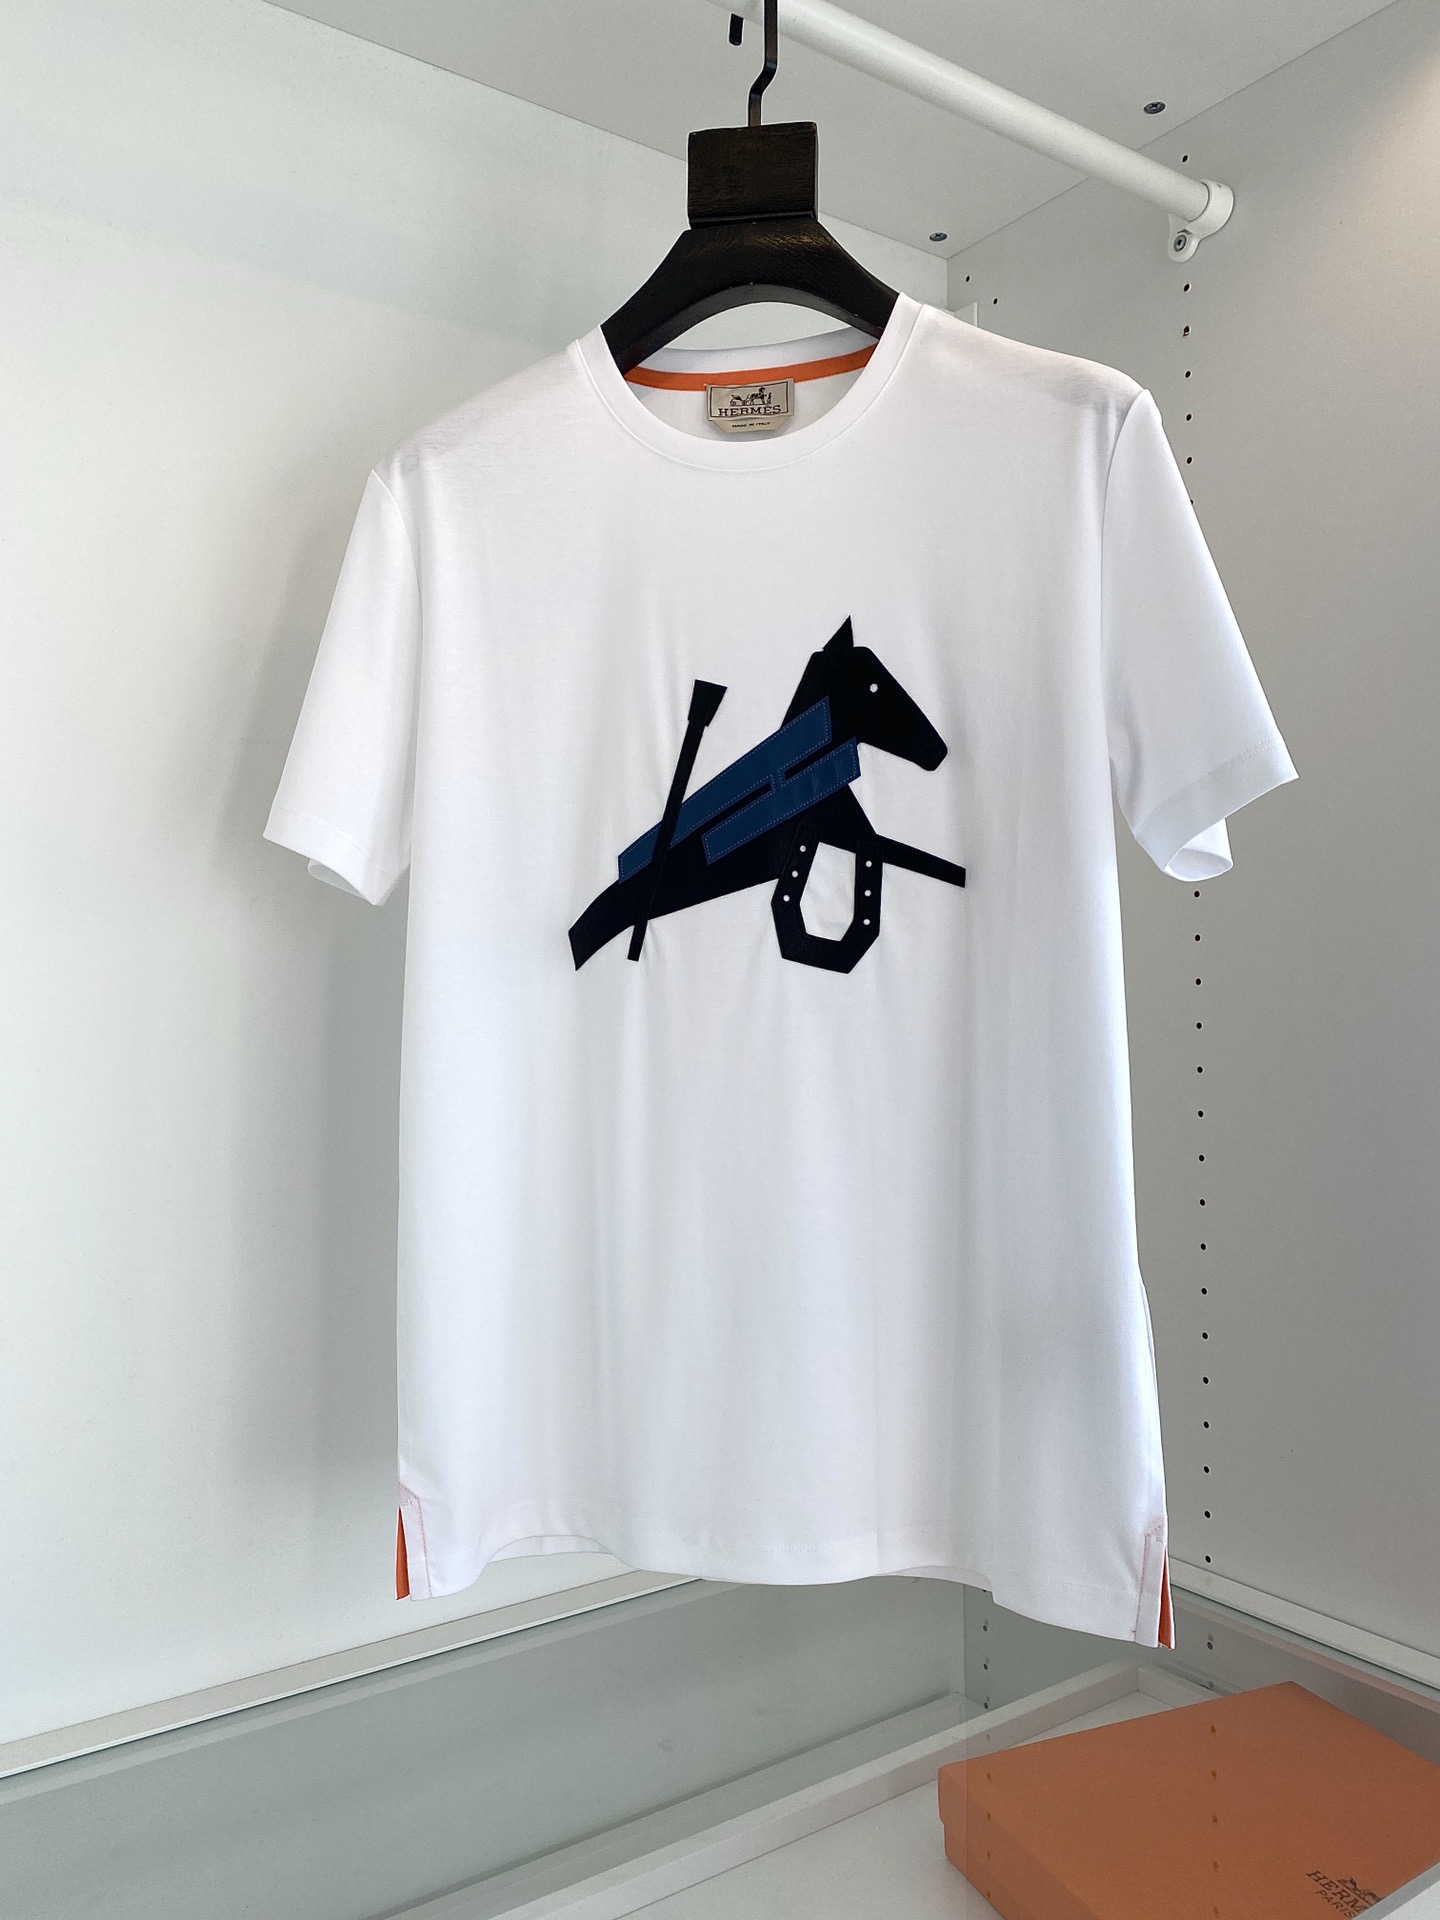 Hermes AAAAA+
 Clothing T-Shirt Green Khaki White Embroidery Men Cotton Mercerized Spring Collection Short Sleeve